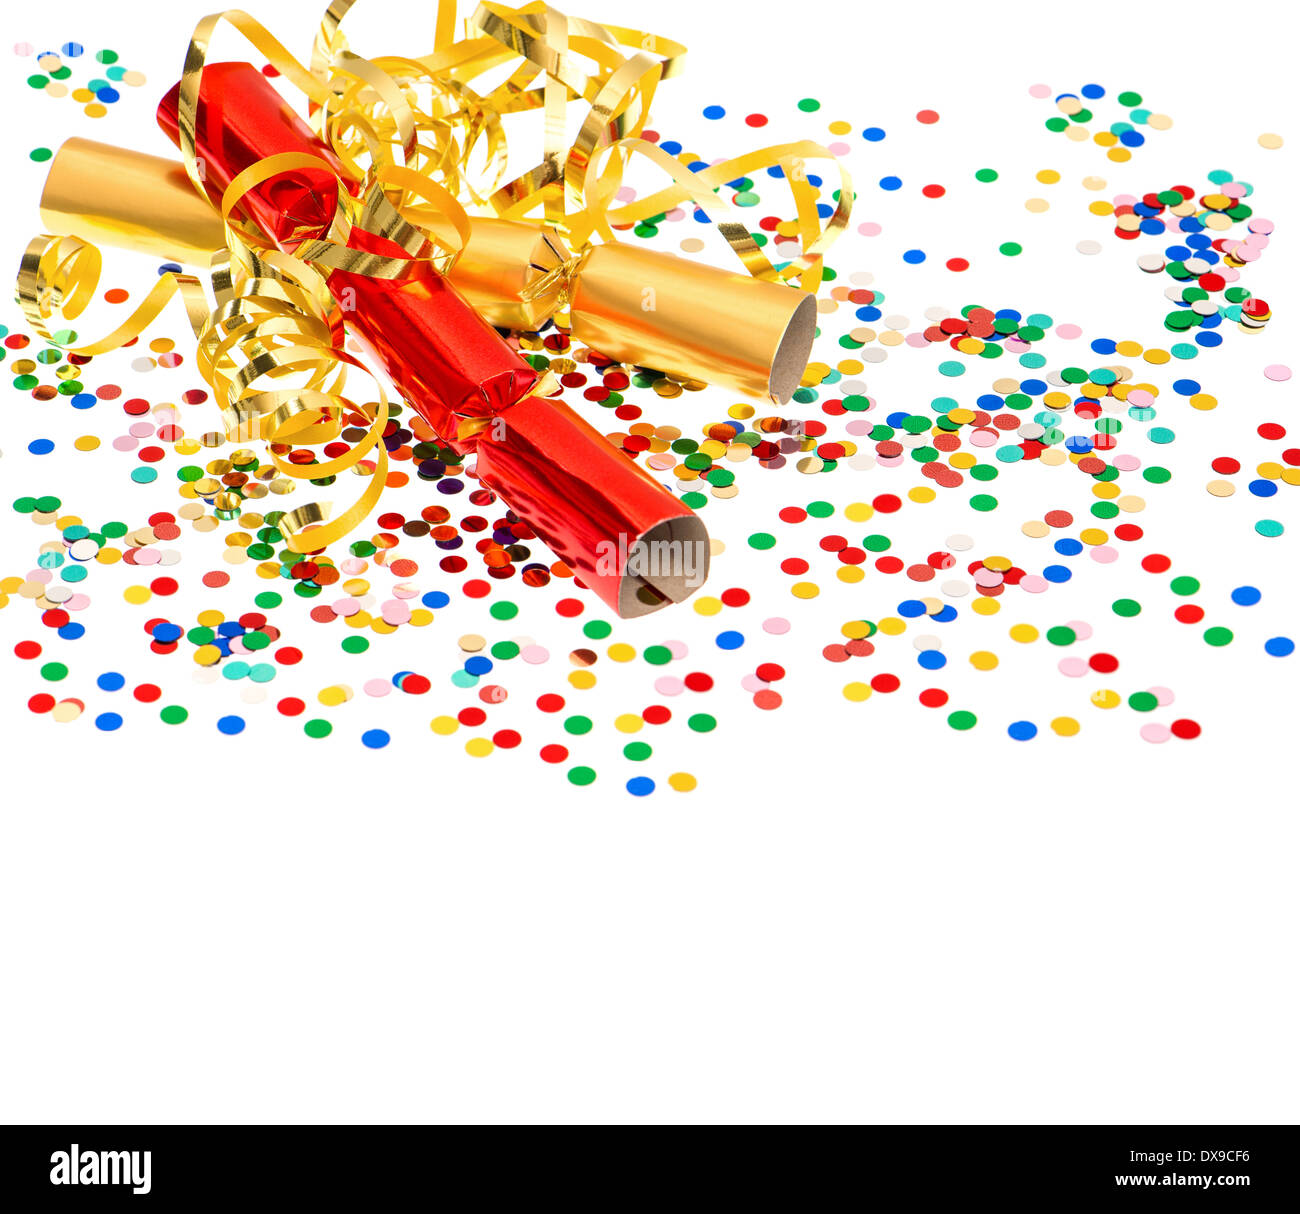 colorful confetti, golden streamer and party cracker over white. festive decoration background Stock Photo